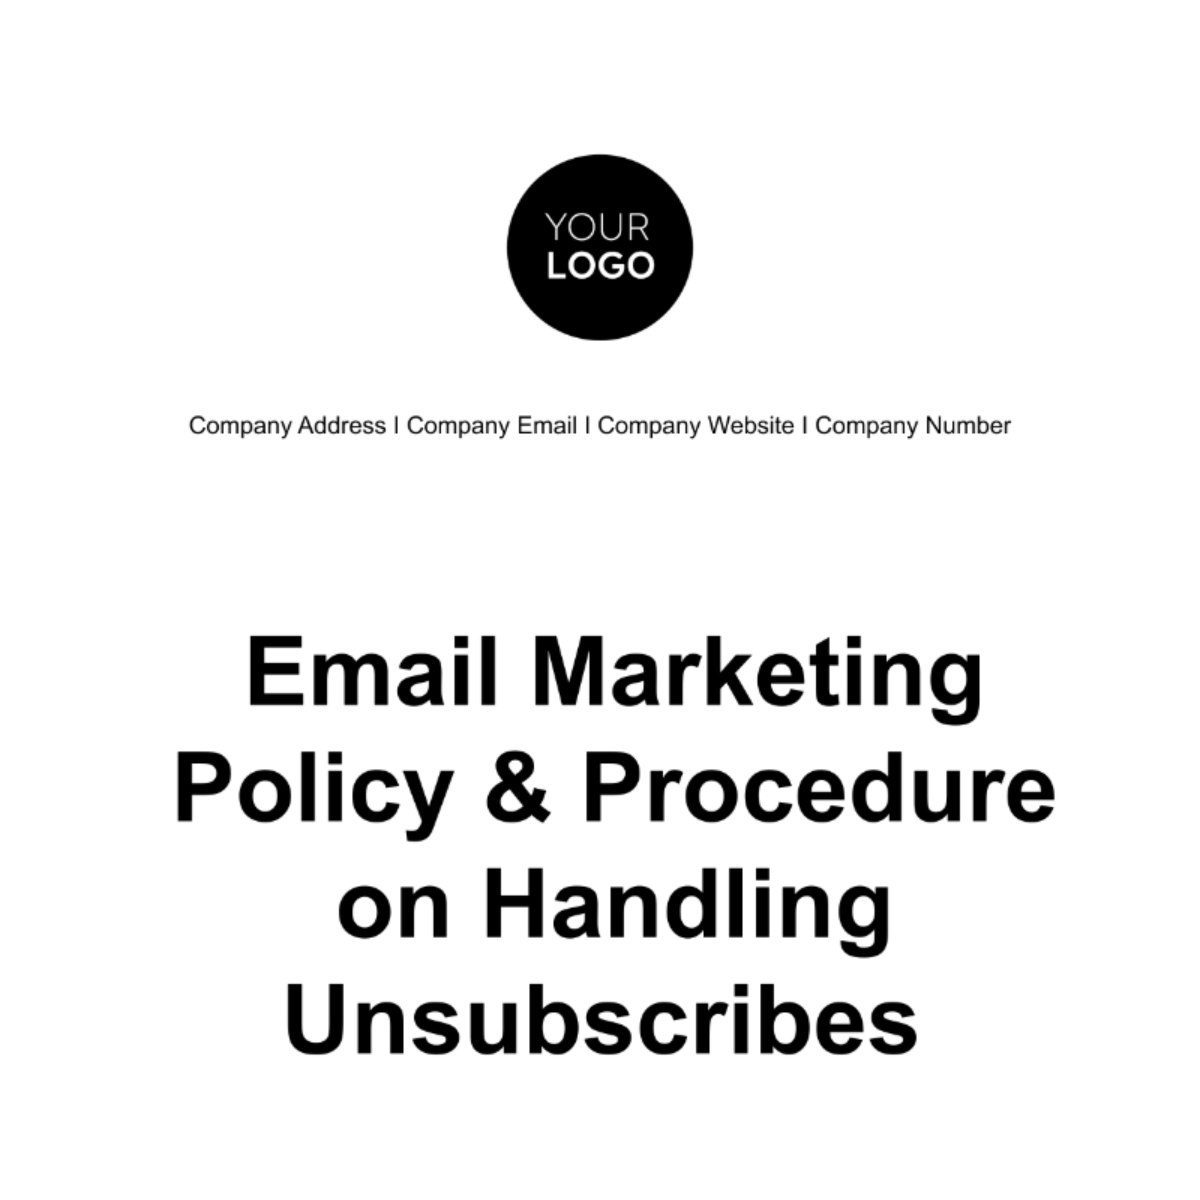 Free Email Marketing Policy & Procedure on Handling Unsubscribes Template